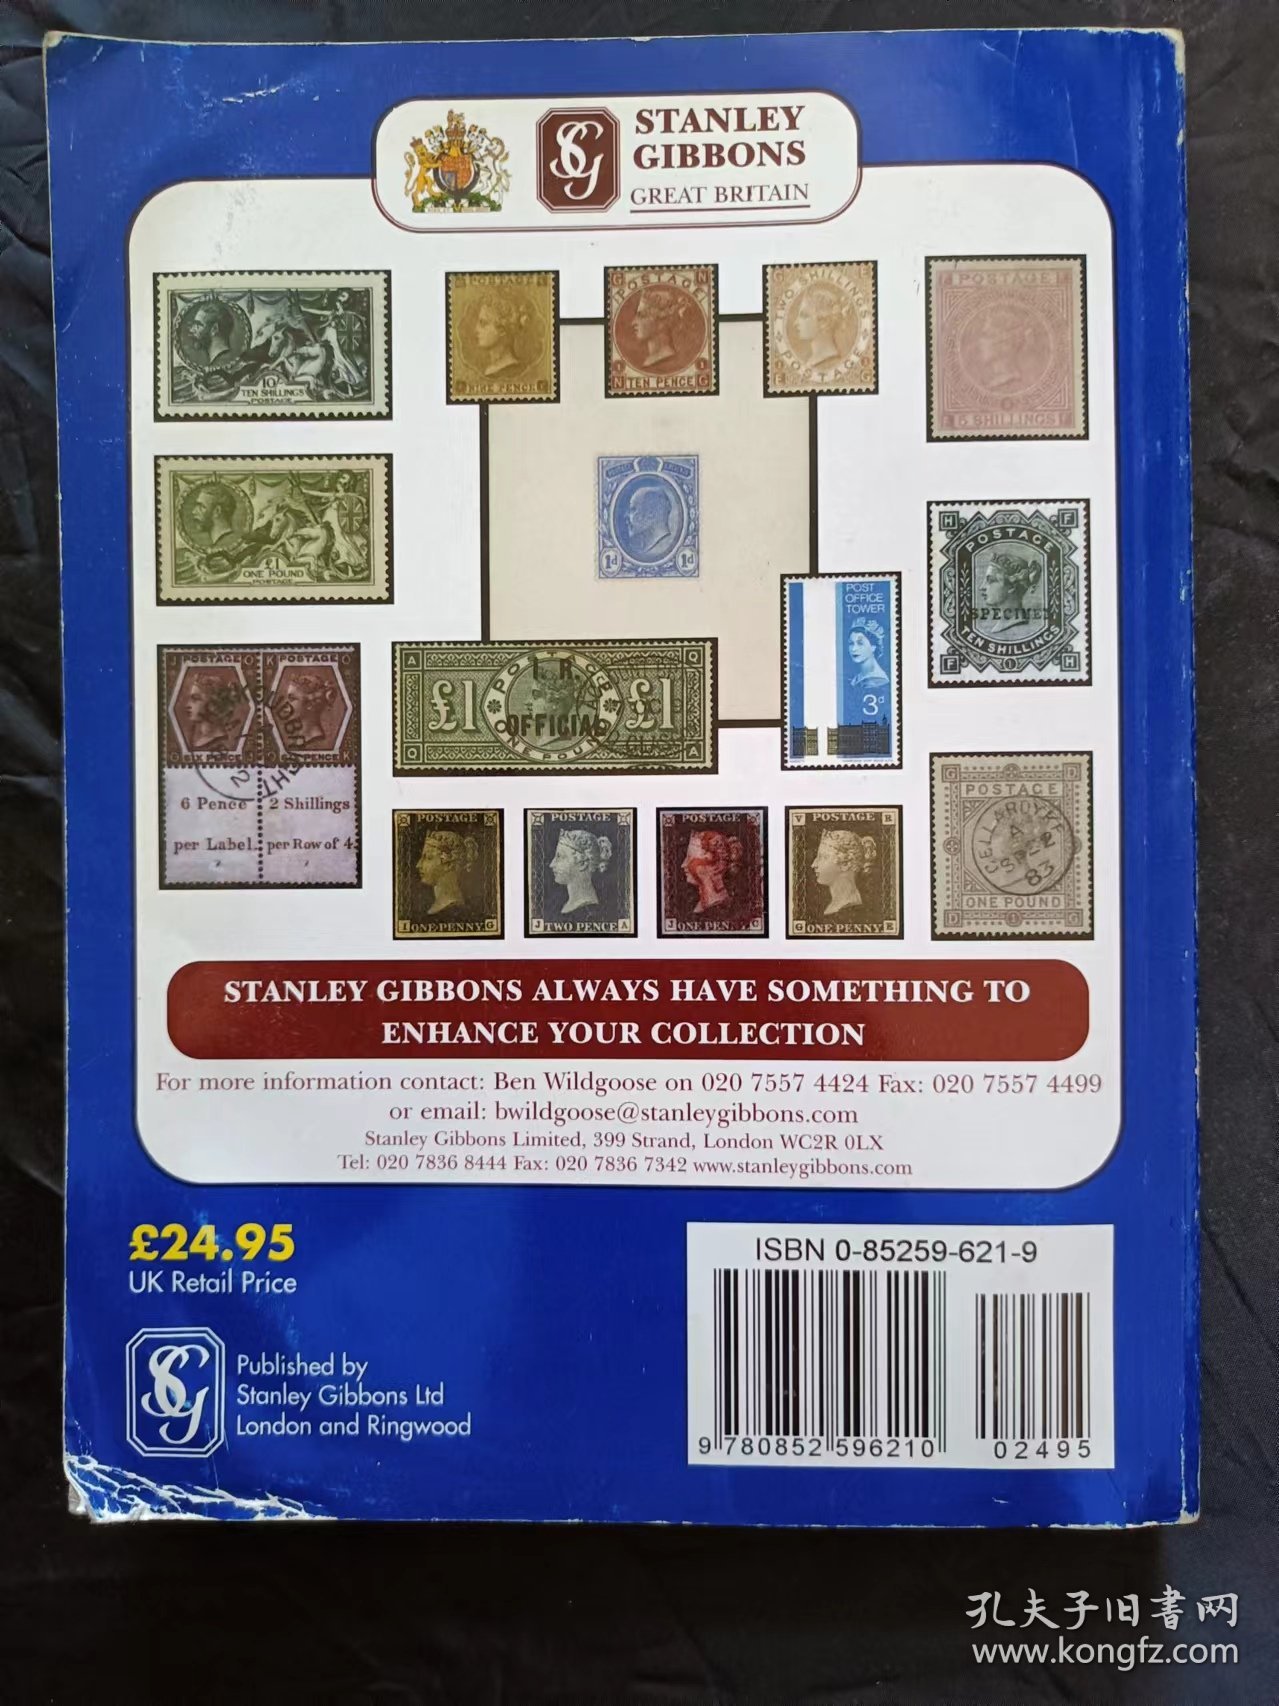 STANLEY GIBBONS BRITAIN STAMP CATALOGUE 吉本斯英国邮票目录